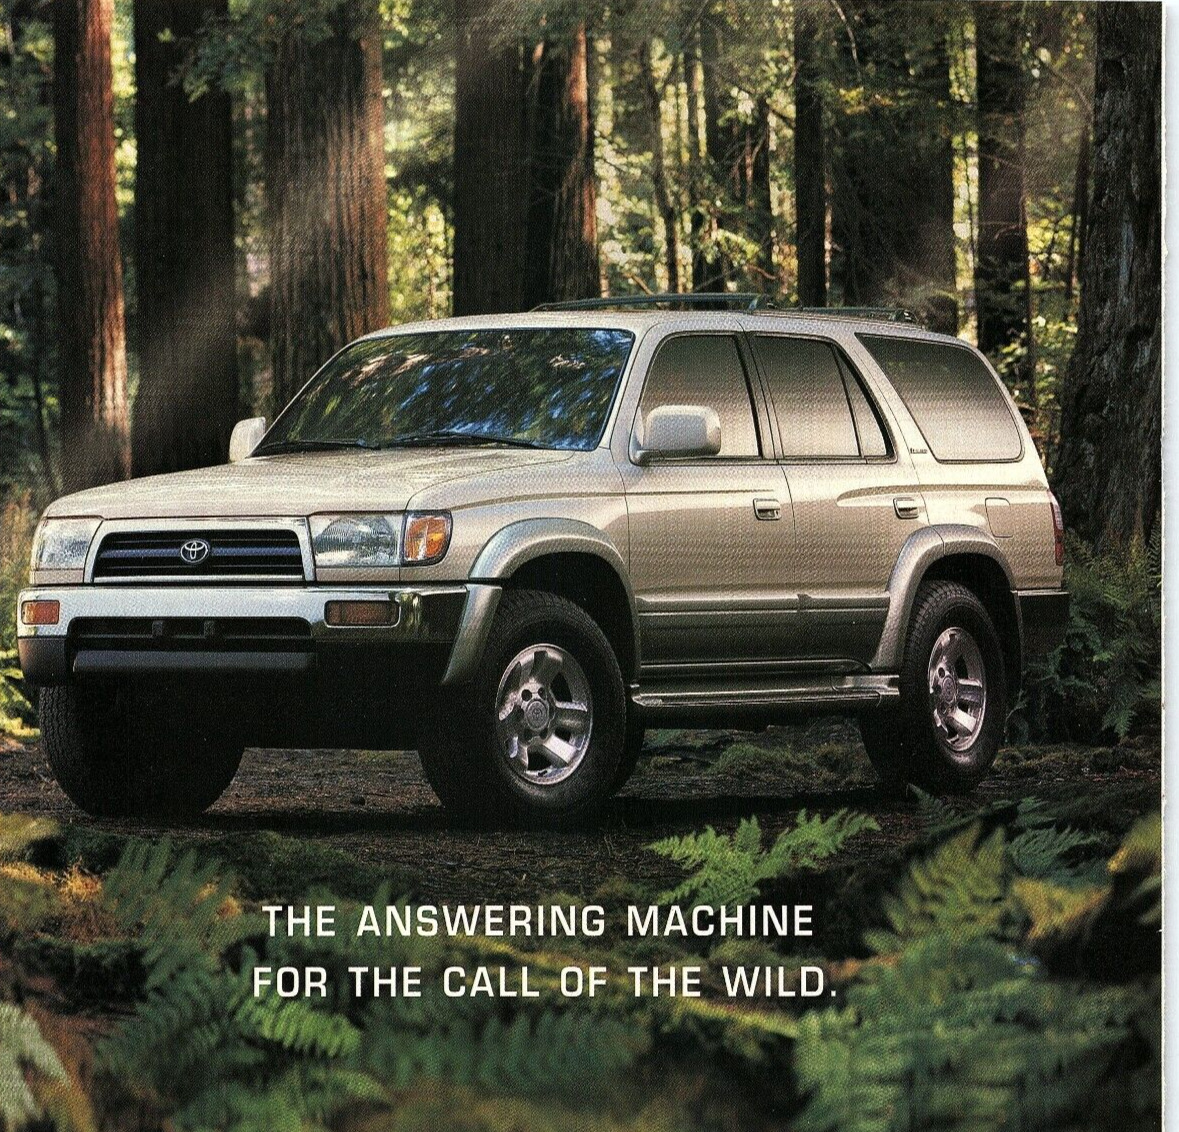 1997 TOYOTA 4RUNNER ANSWERING MACHINE FOR THE CALL OF THE WILD PRINT AD Z2761